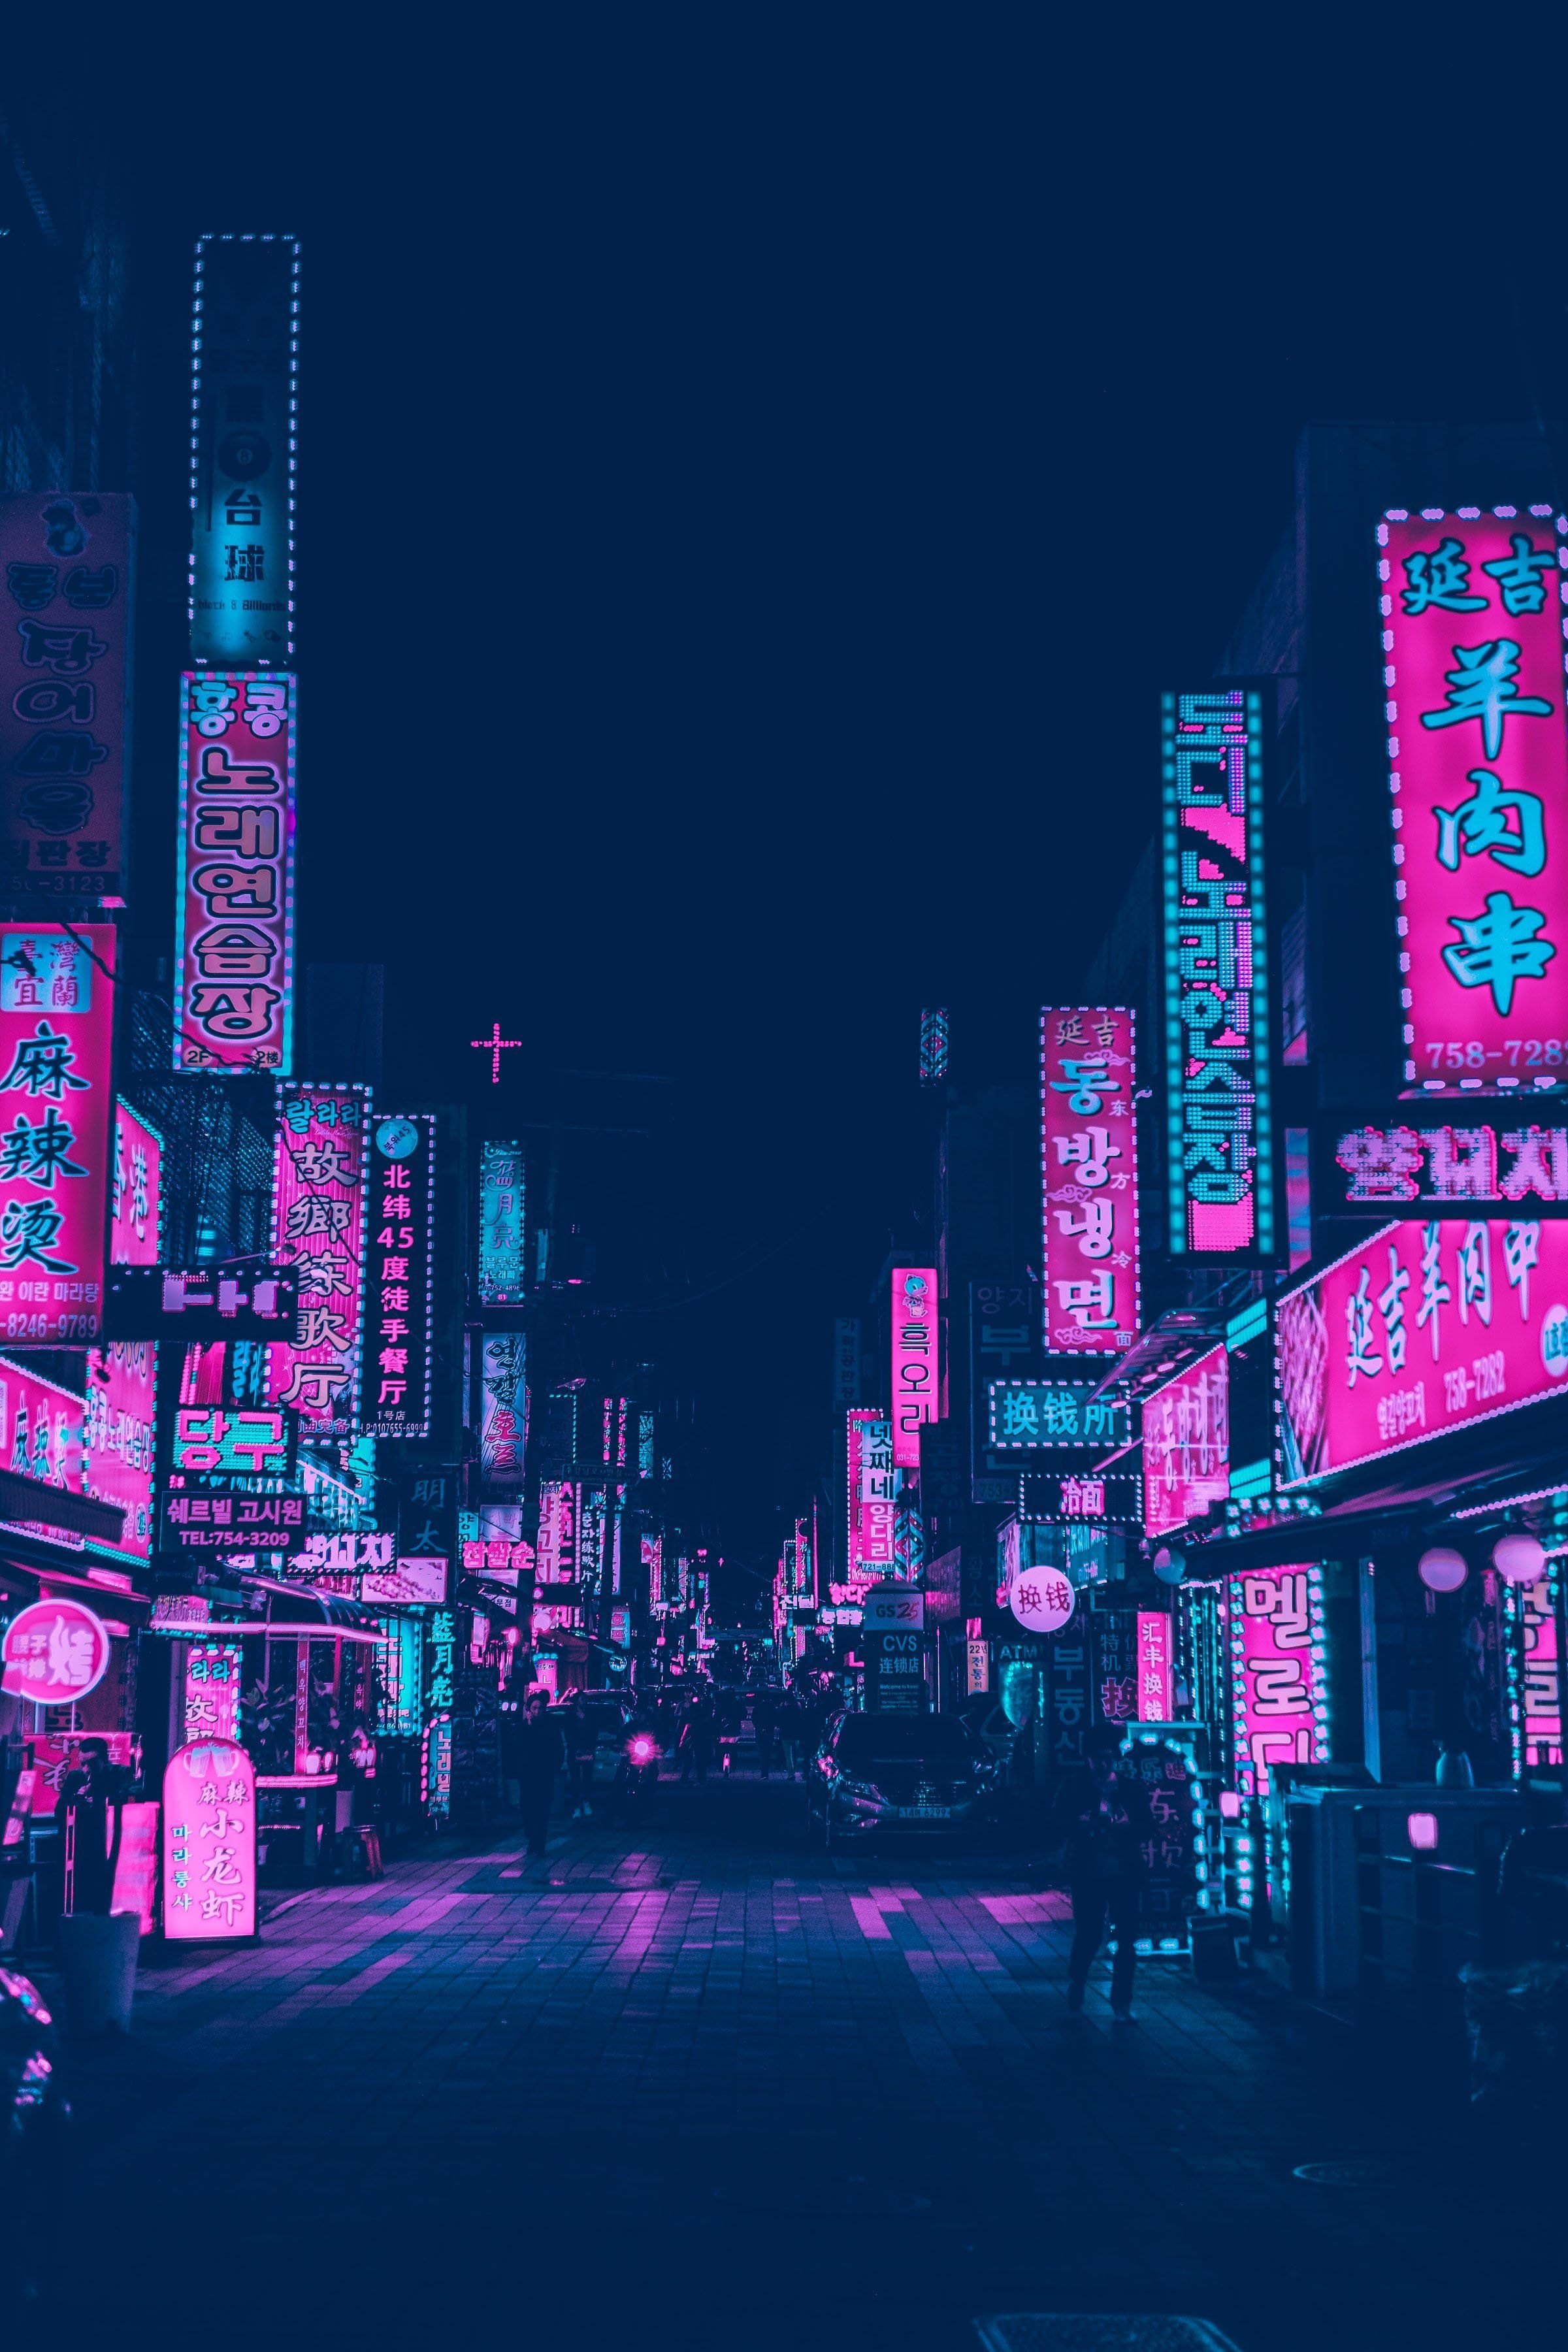 The Marketplace Neon Poster. Tokyo aesthetic, Neon aesthetic, City background